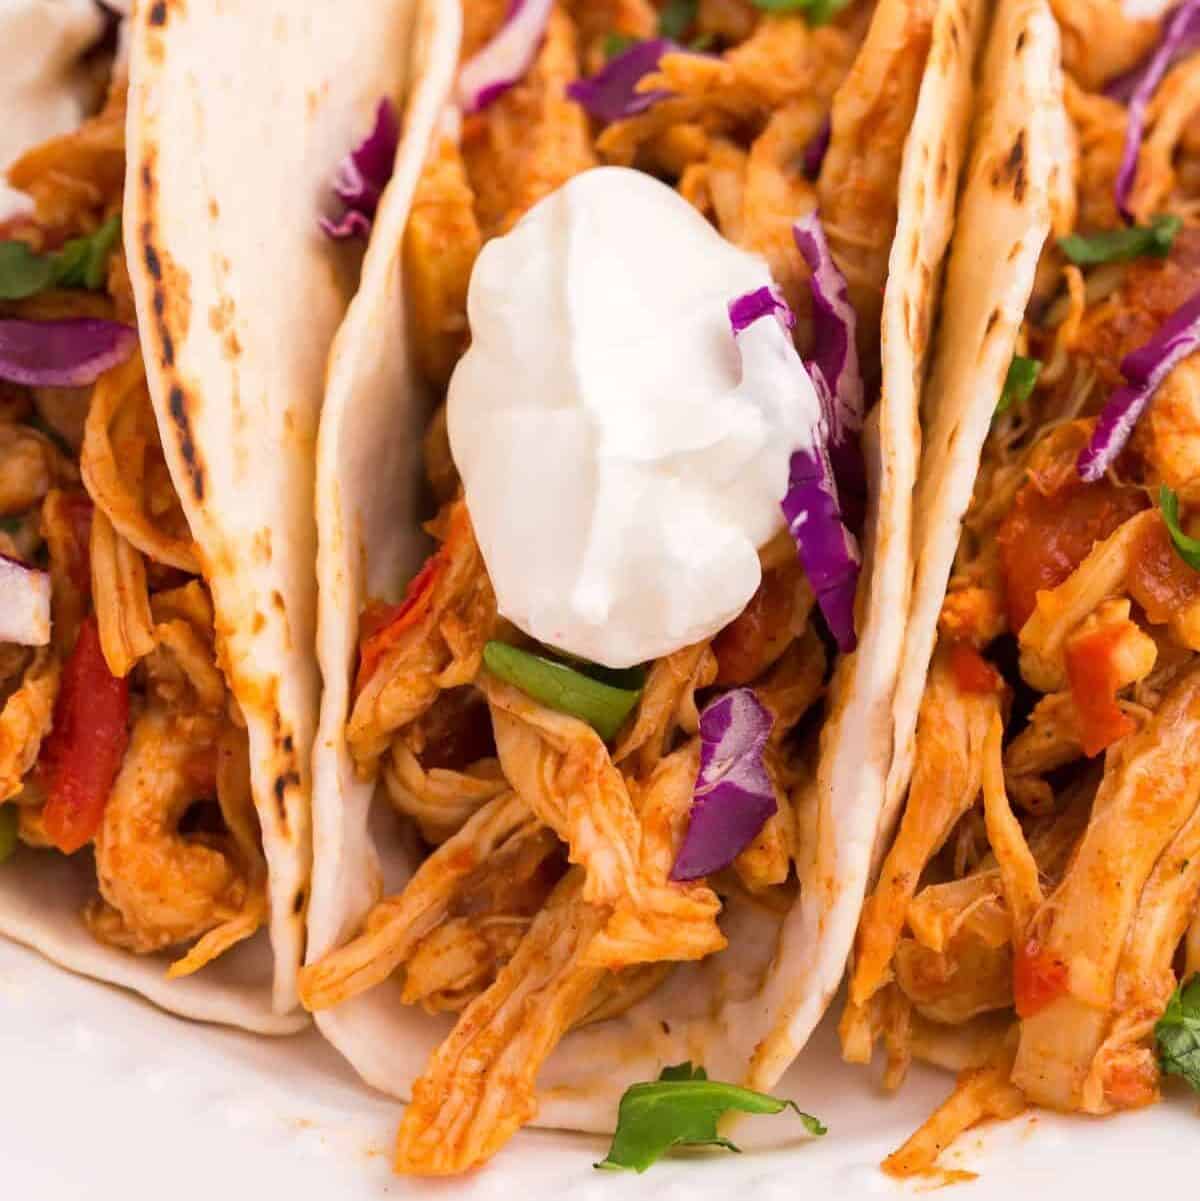 shredded chicken taco with flour tortillas and sour cream